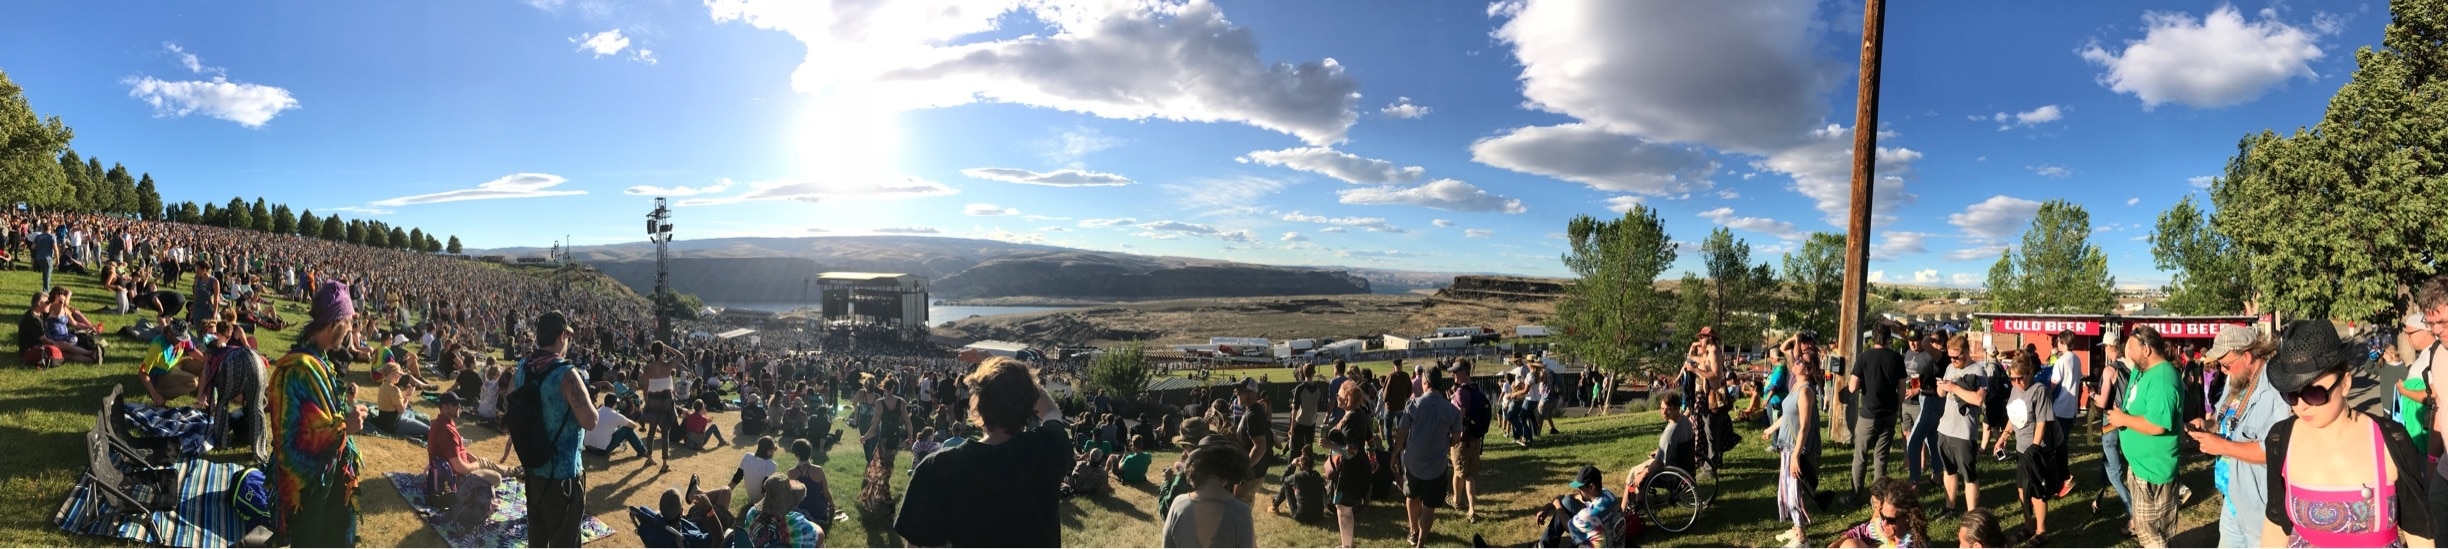 are dogs allowed at the gorge amphitheater